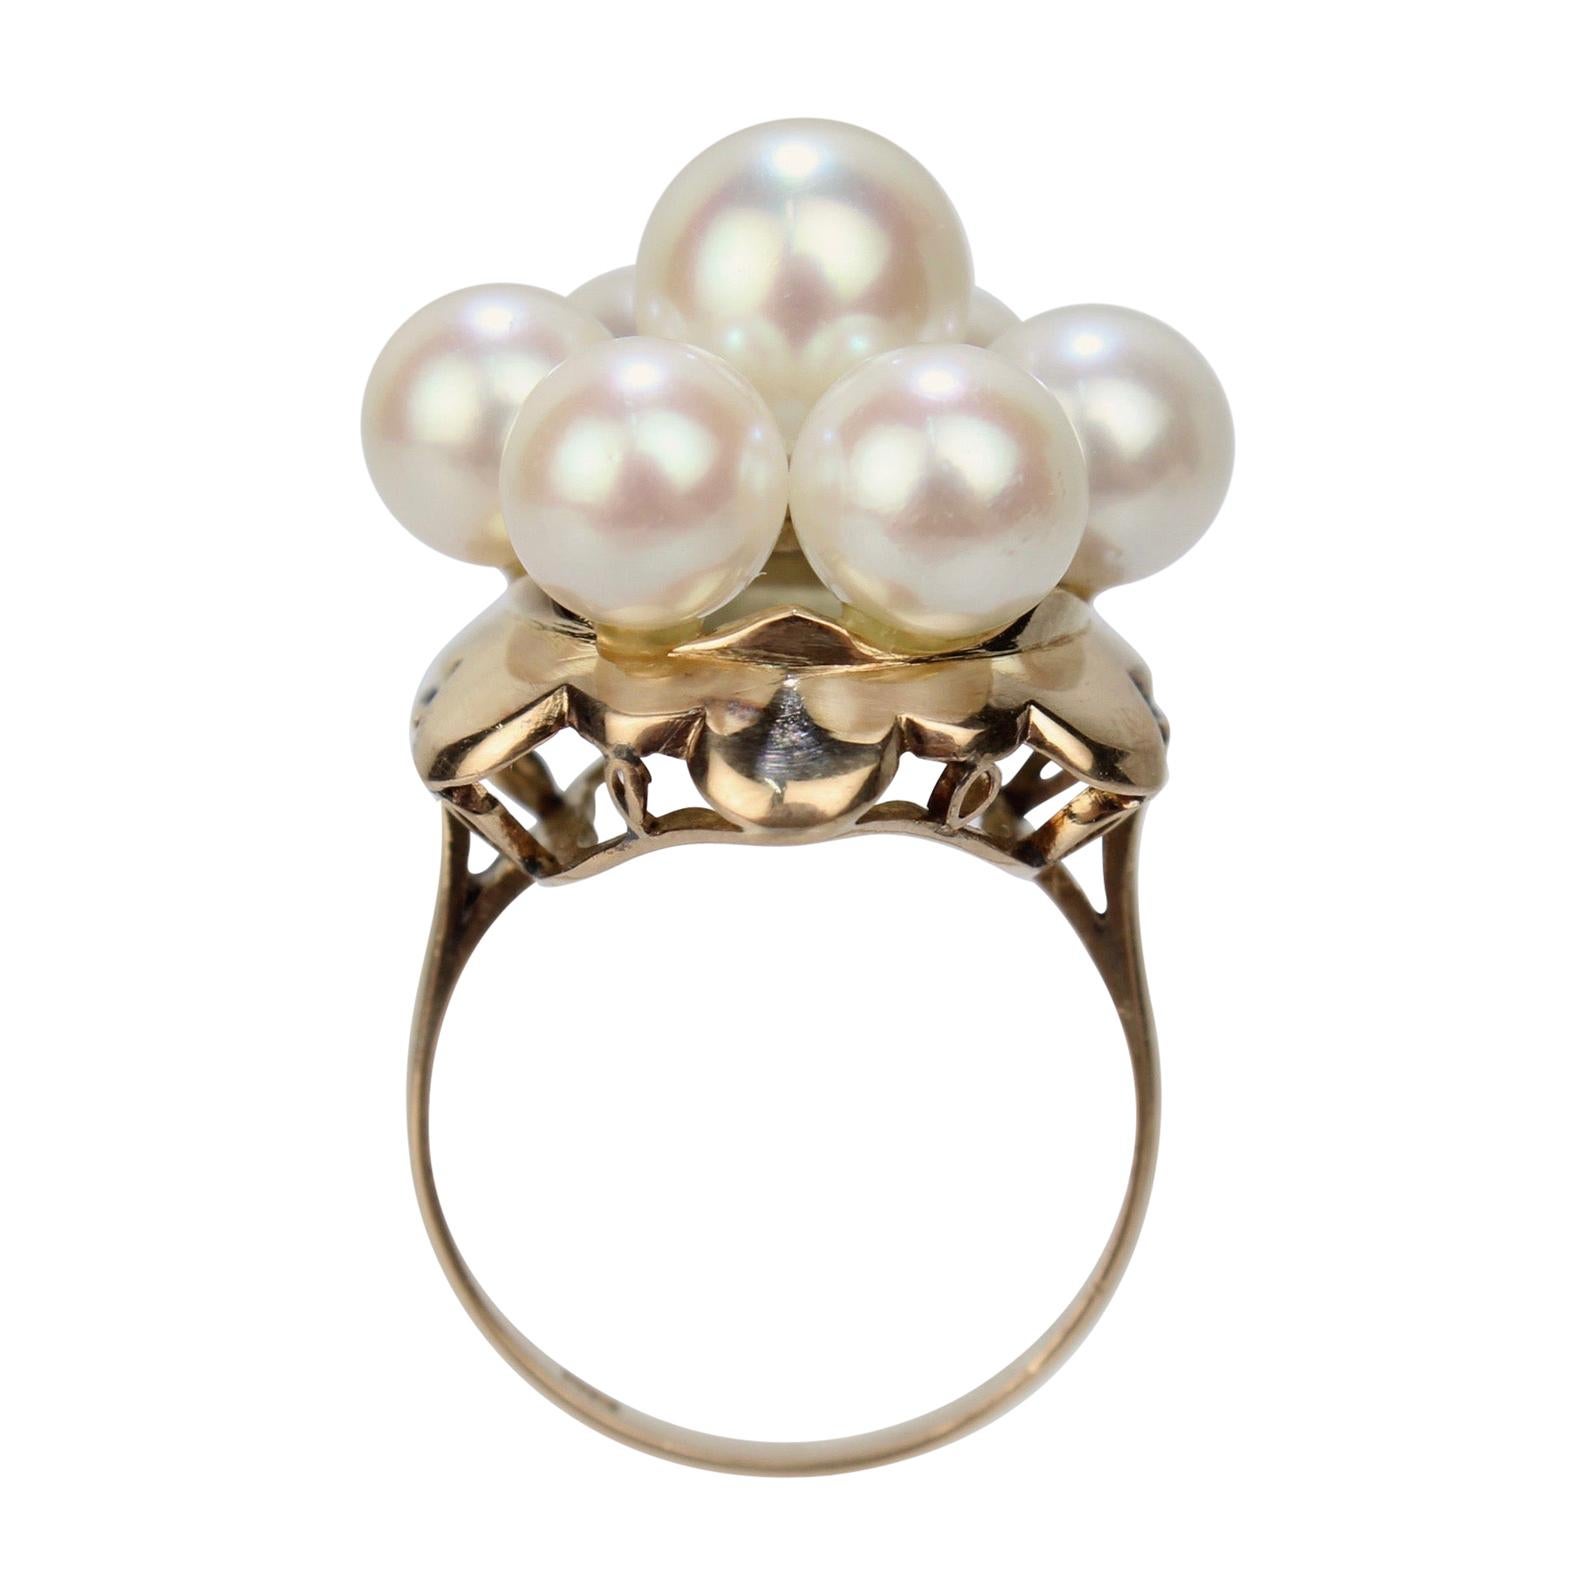 Antique 18 Karat Gold and Pearl Cluster Midcentury Cocktail Ring